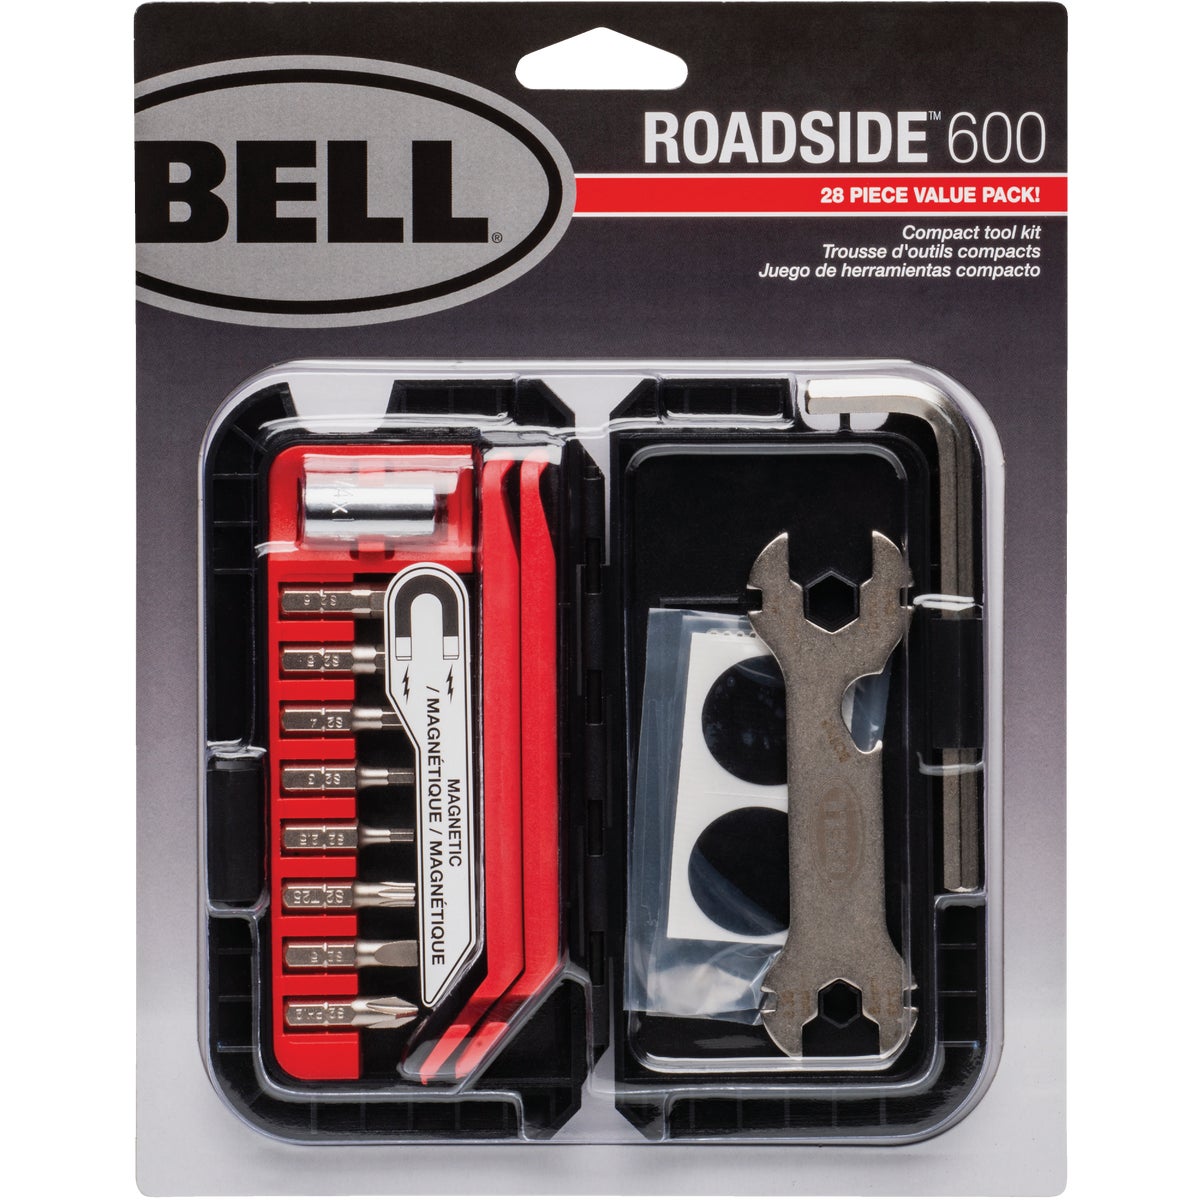 Item 800764, Compact and easy to use, the Bell Roadside 600 has a variety of tools to 